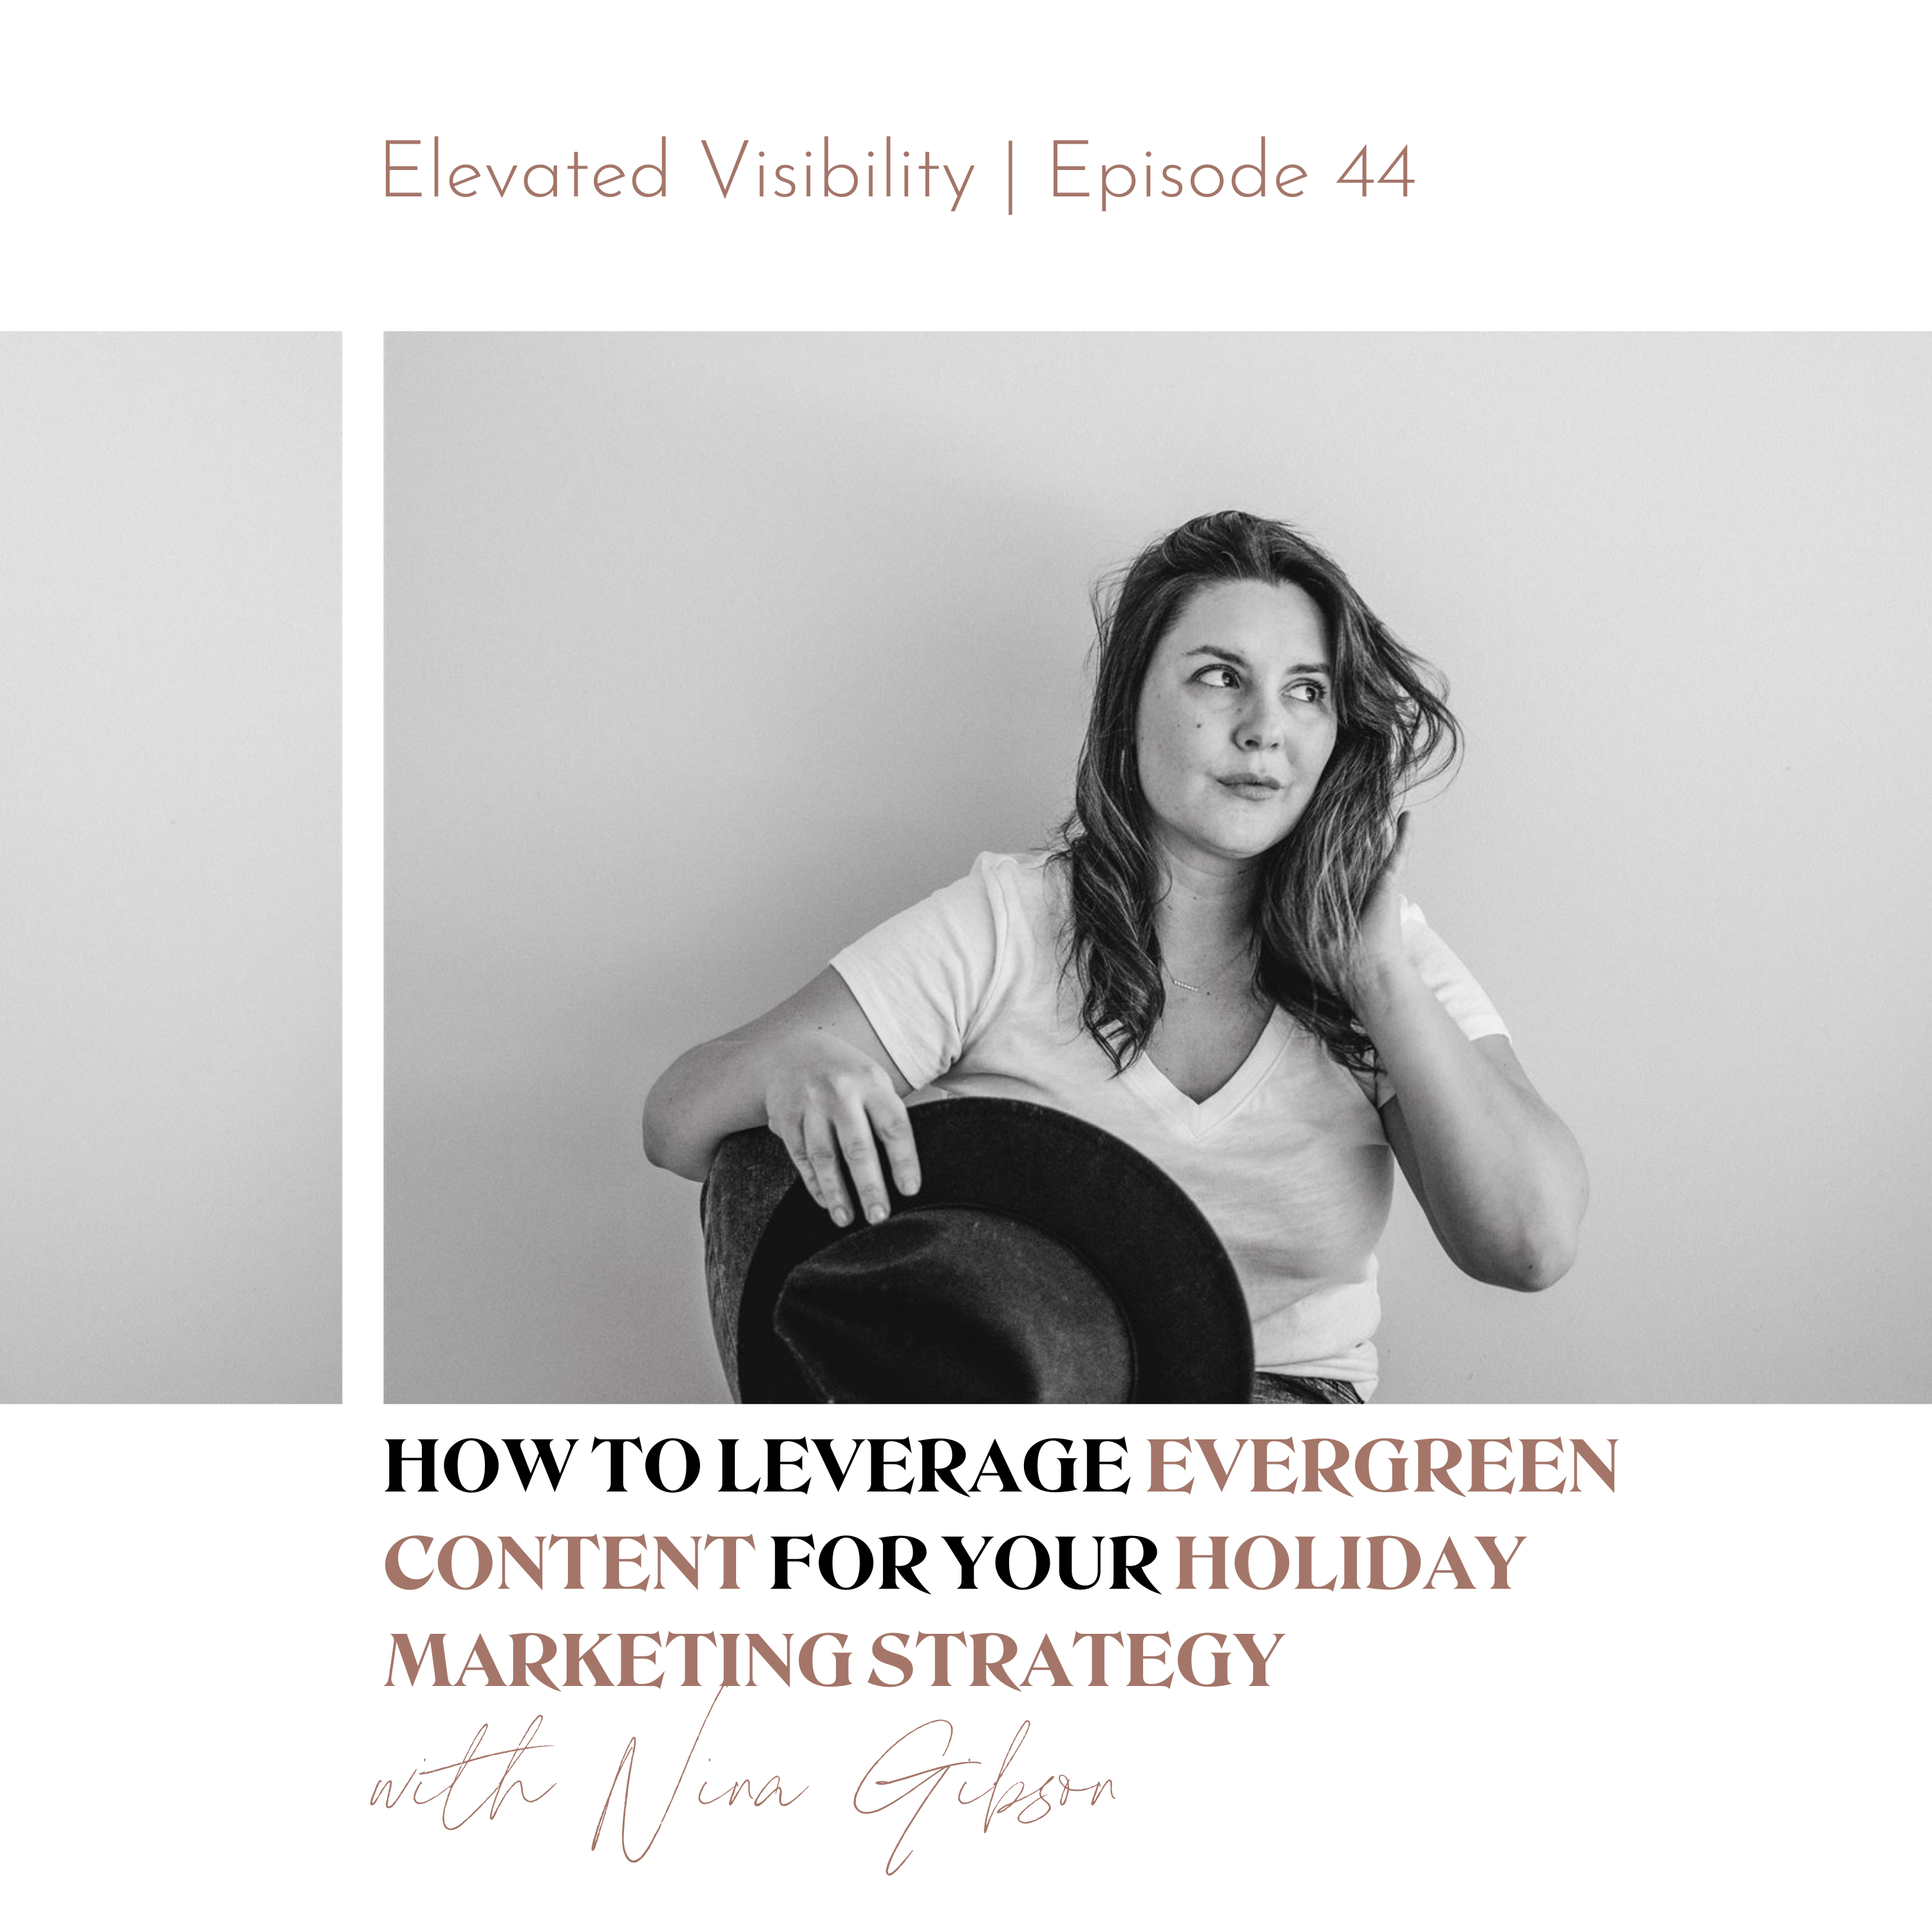 How to Leverage Evergreen Content for Your Holiday Marketing Strategy Episode 44 of the Elevated Visibility Podcast featured image